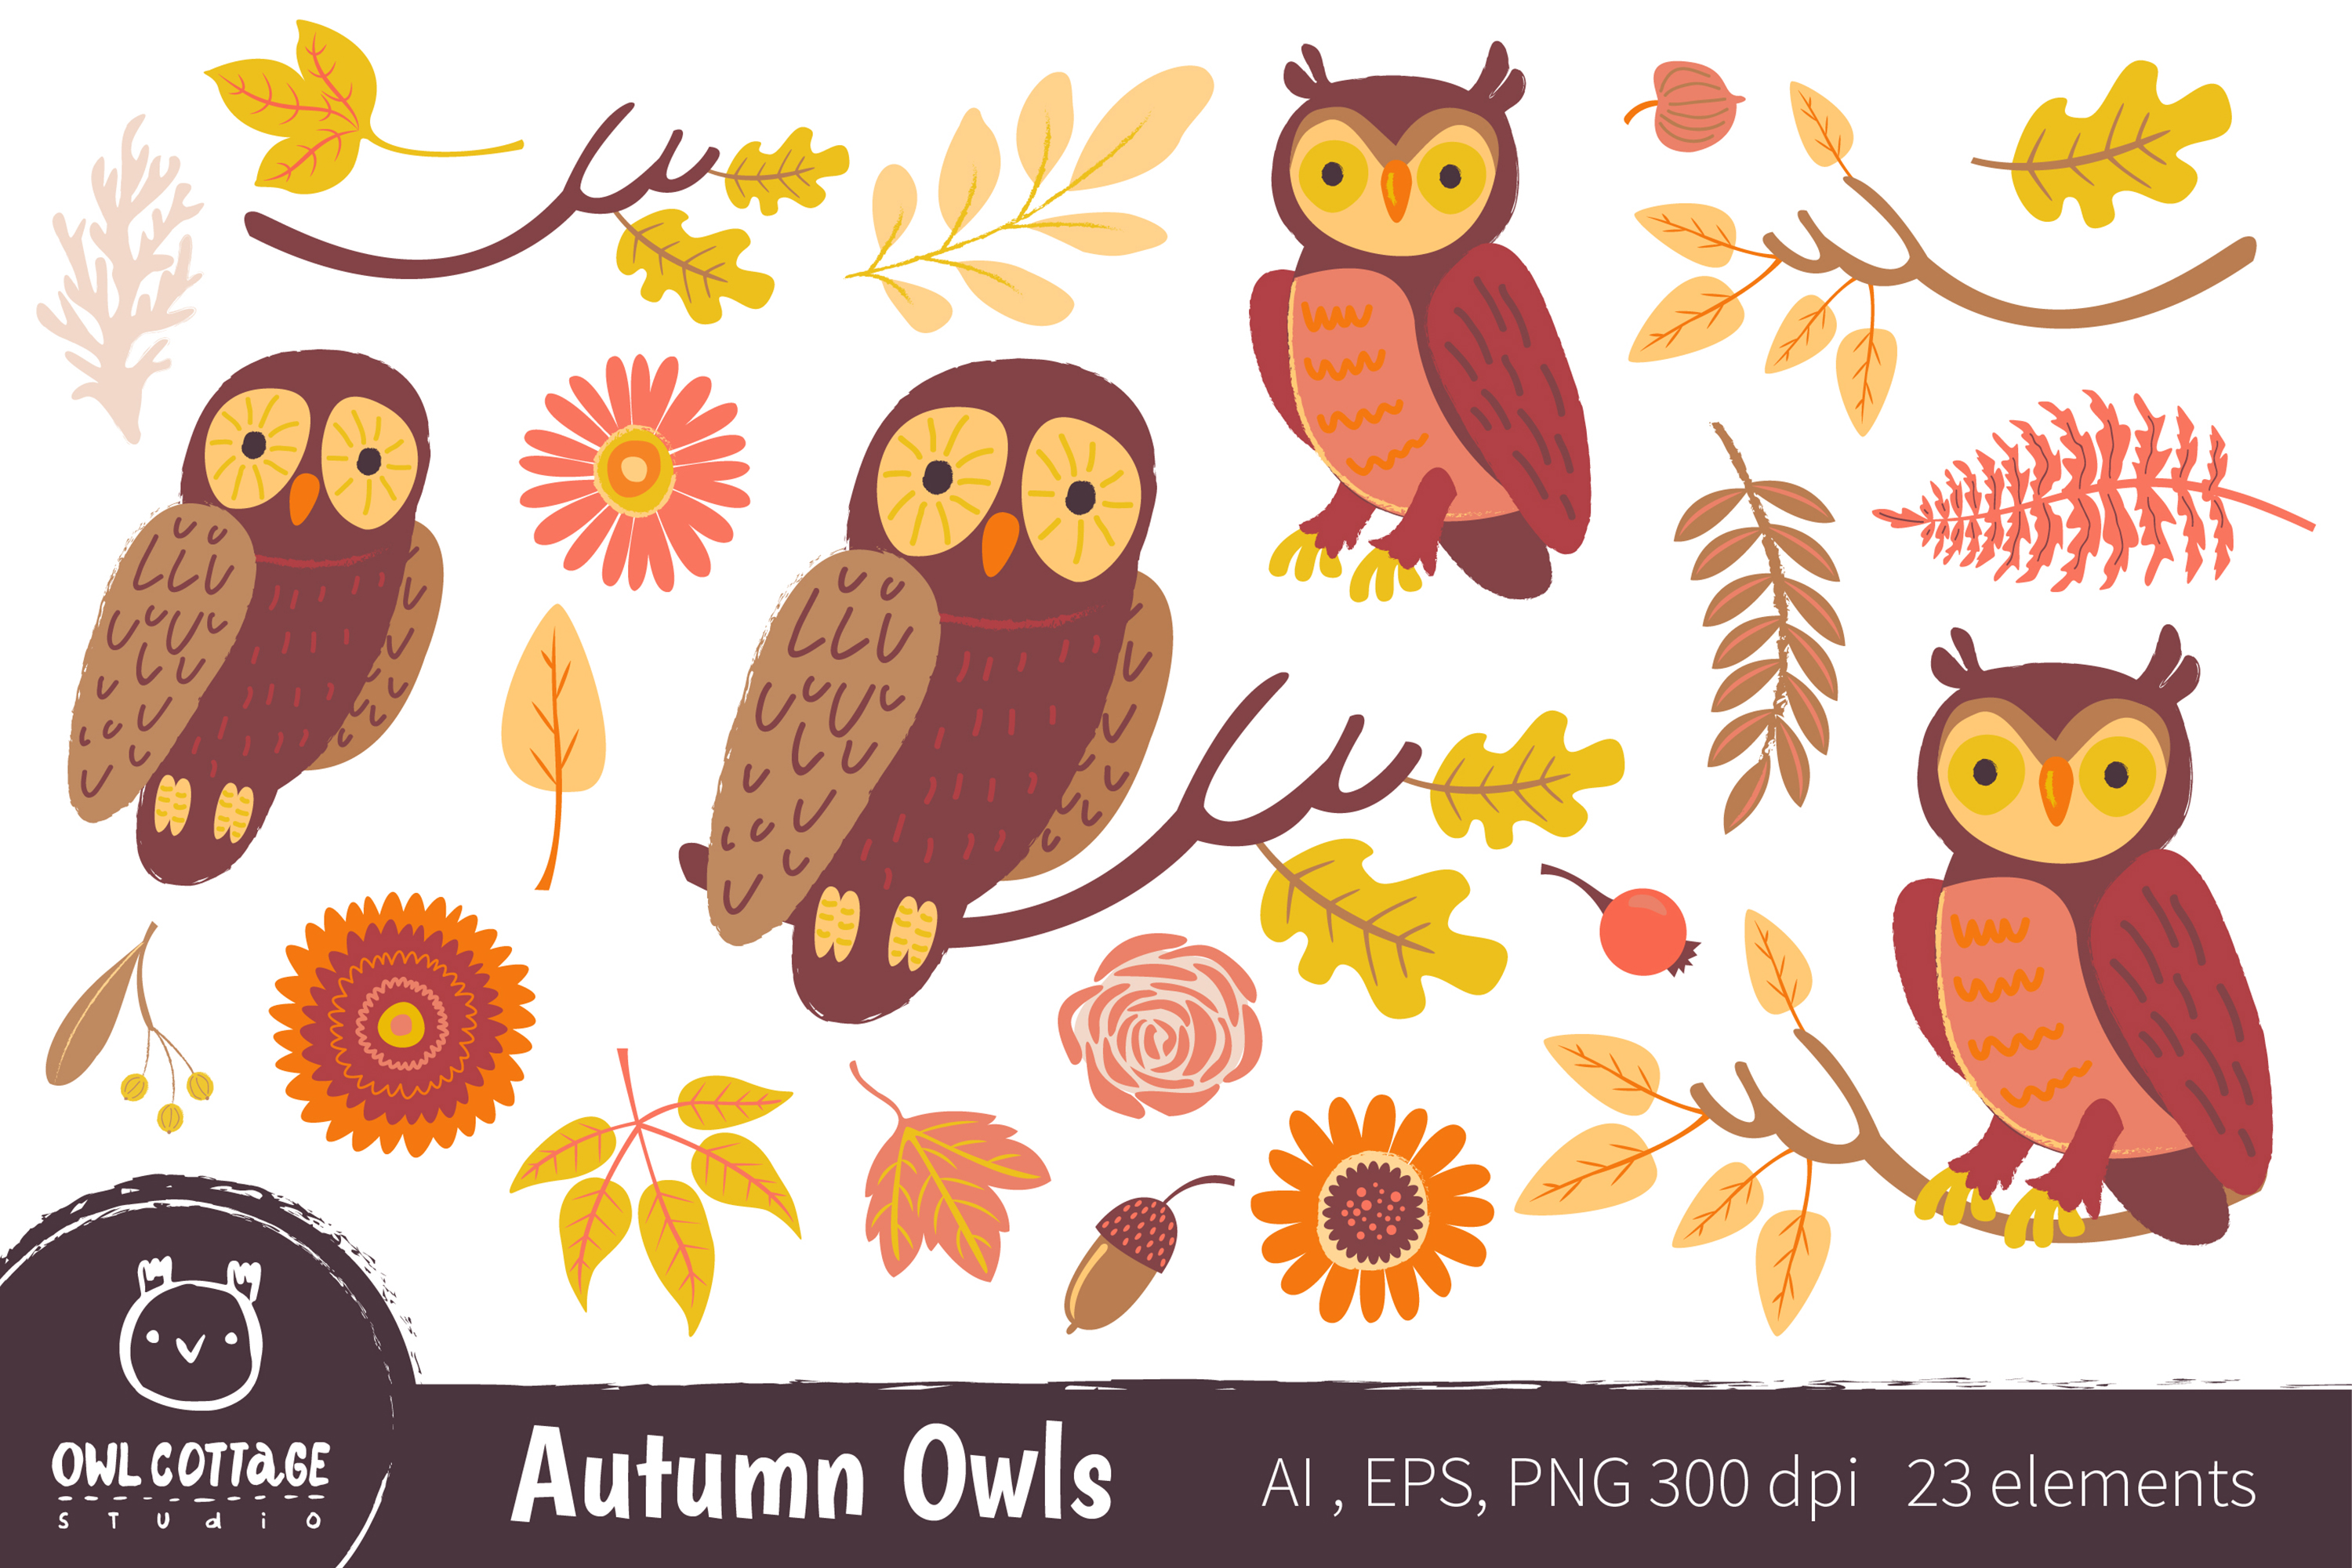 Autumn owls and.